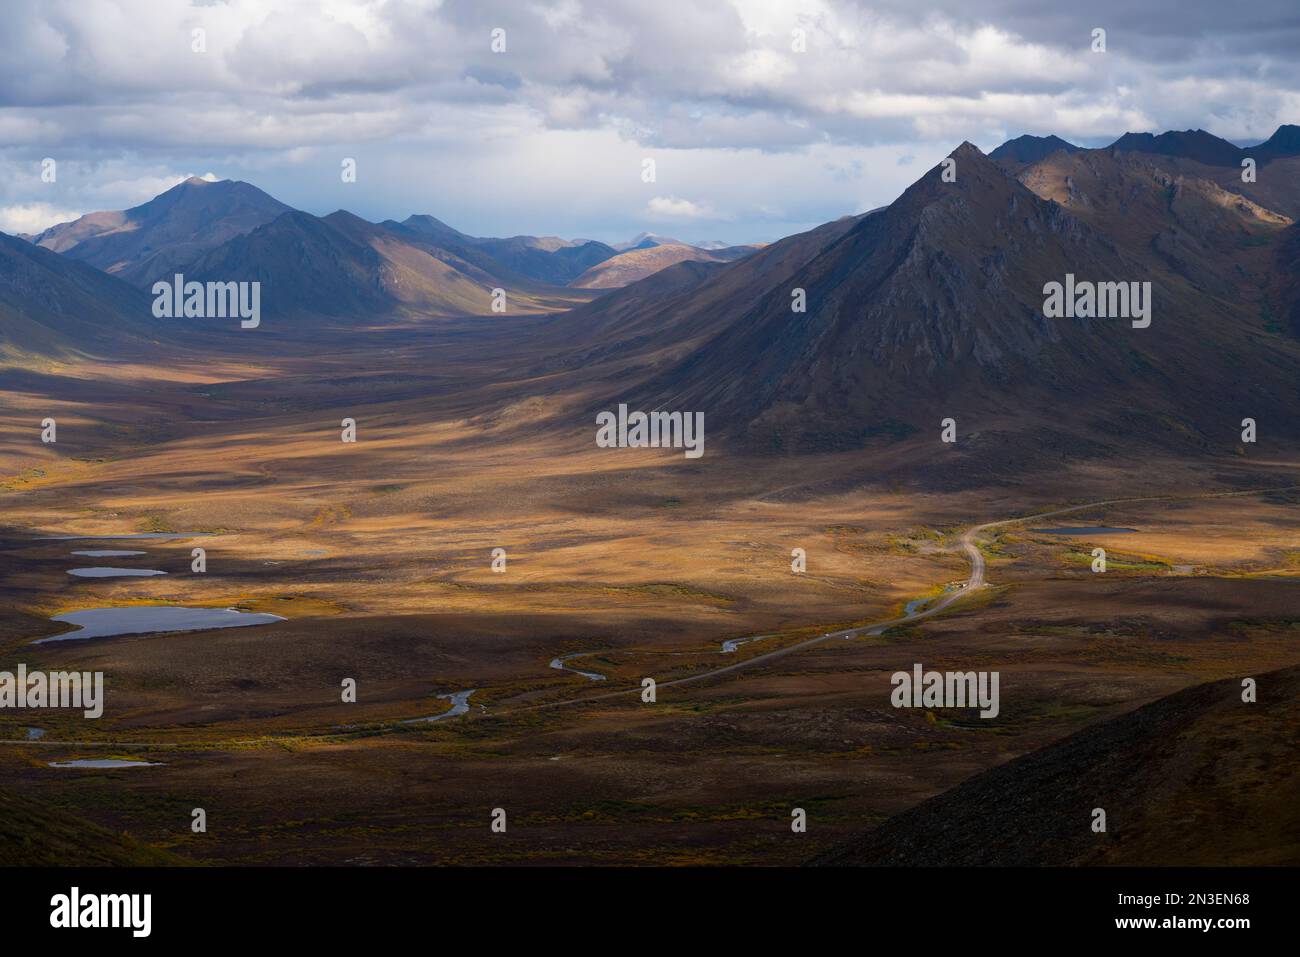 The Dempster Highway winds its way through the landscape as seen from the summit of Mount Adney. Autumn creates a kaleidoscope of color on the tundra Stock Photo